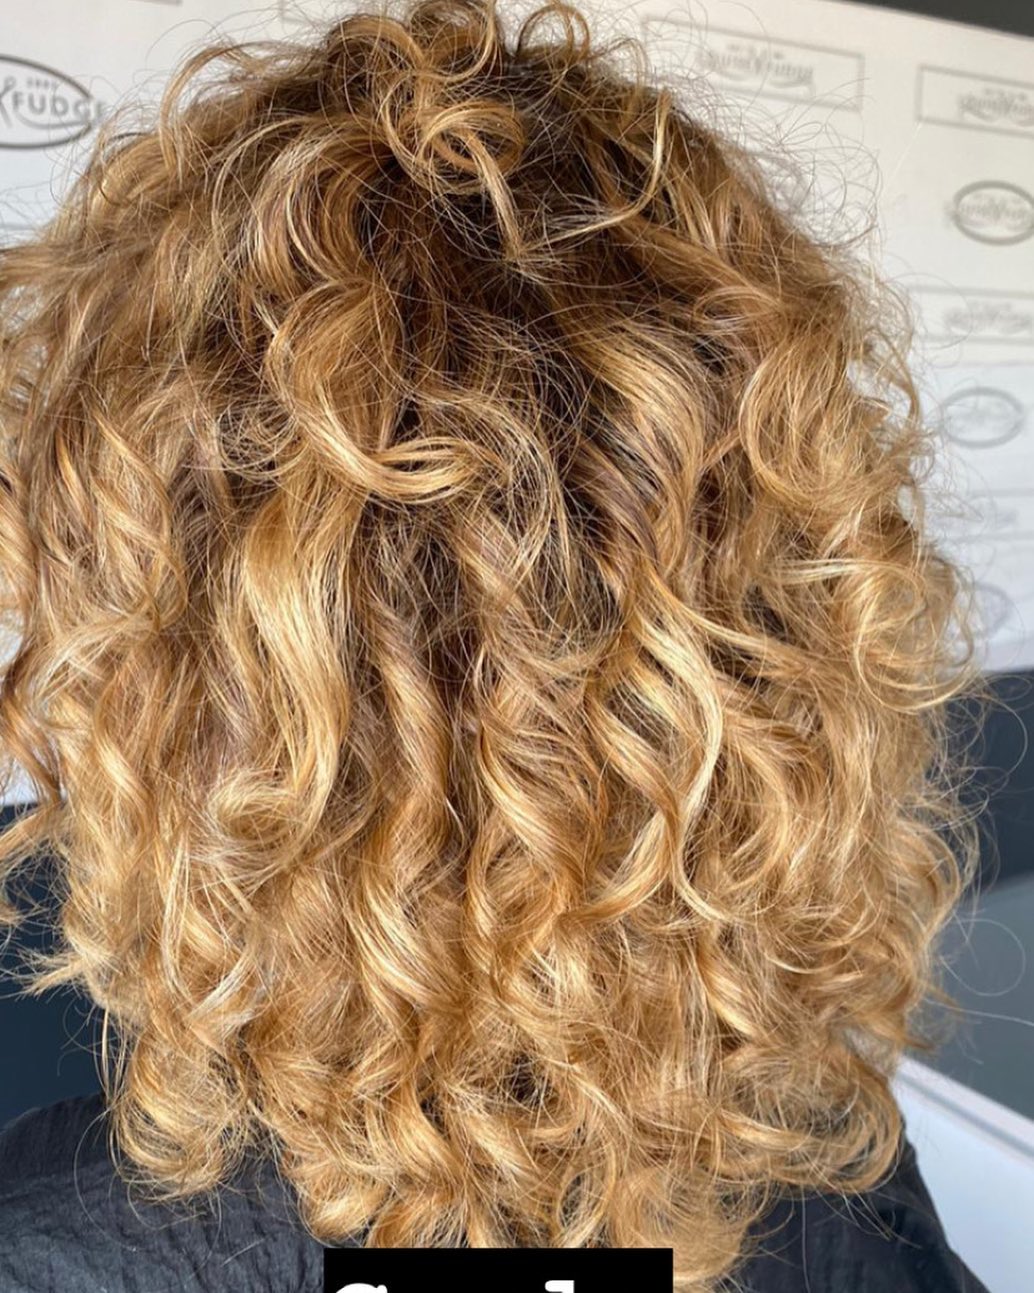 CURLY PARTY HAIRSTYLES AT LOUISE FUDGE HAIRDRESSERS IN HESWALL AND LITTLE SUTTON